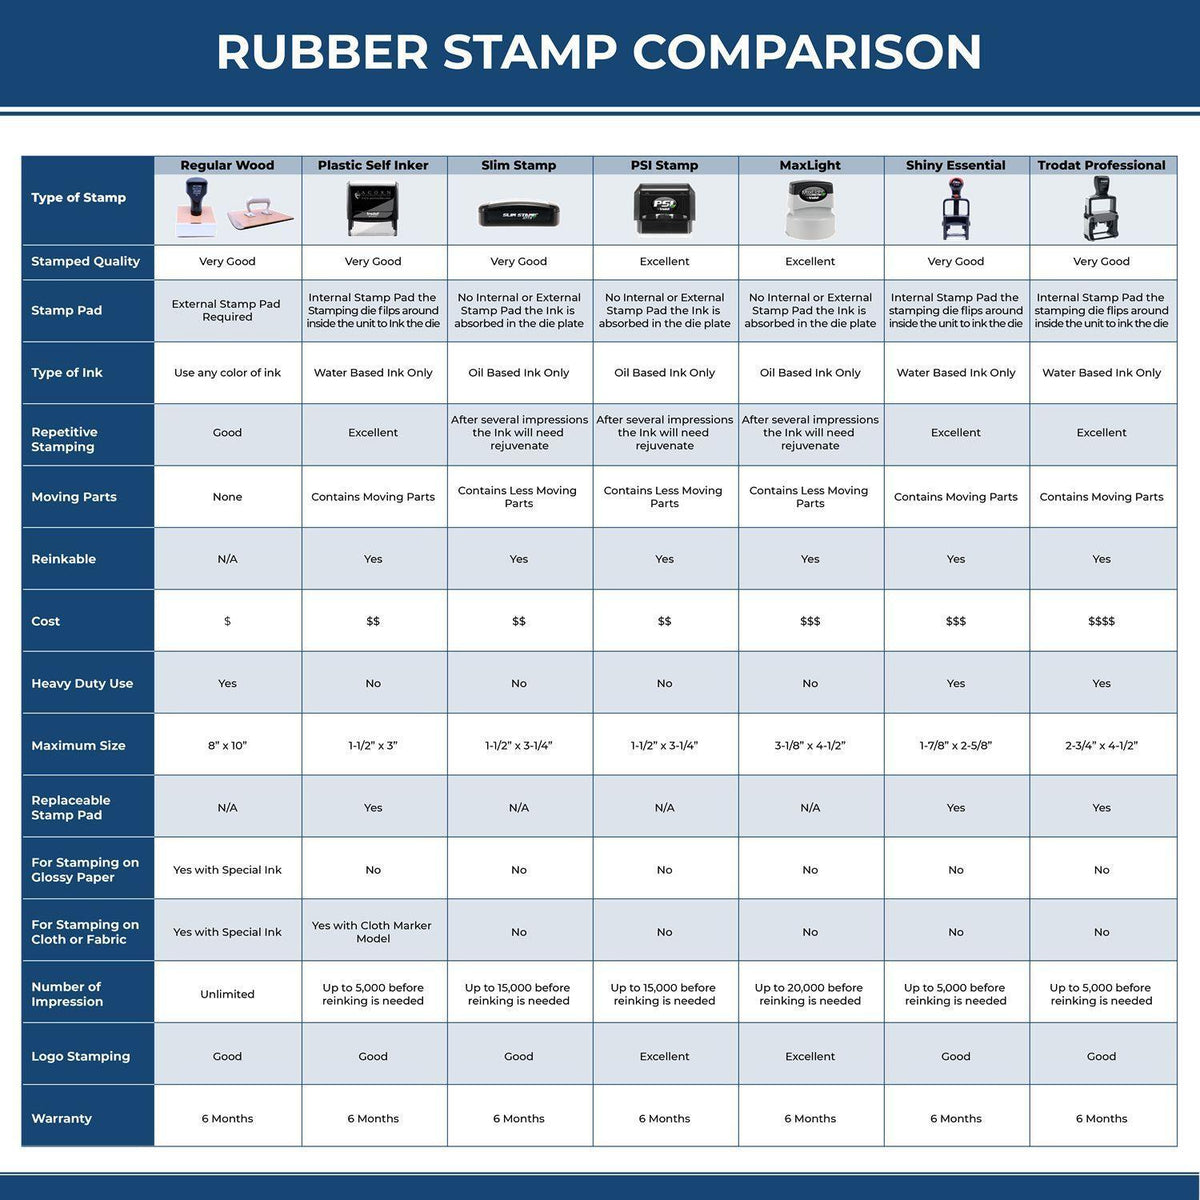 Large Narrow First Class Mail Rubber Stamp 5639R Rubber Stamp Comparison